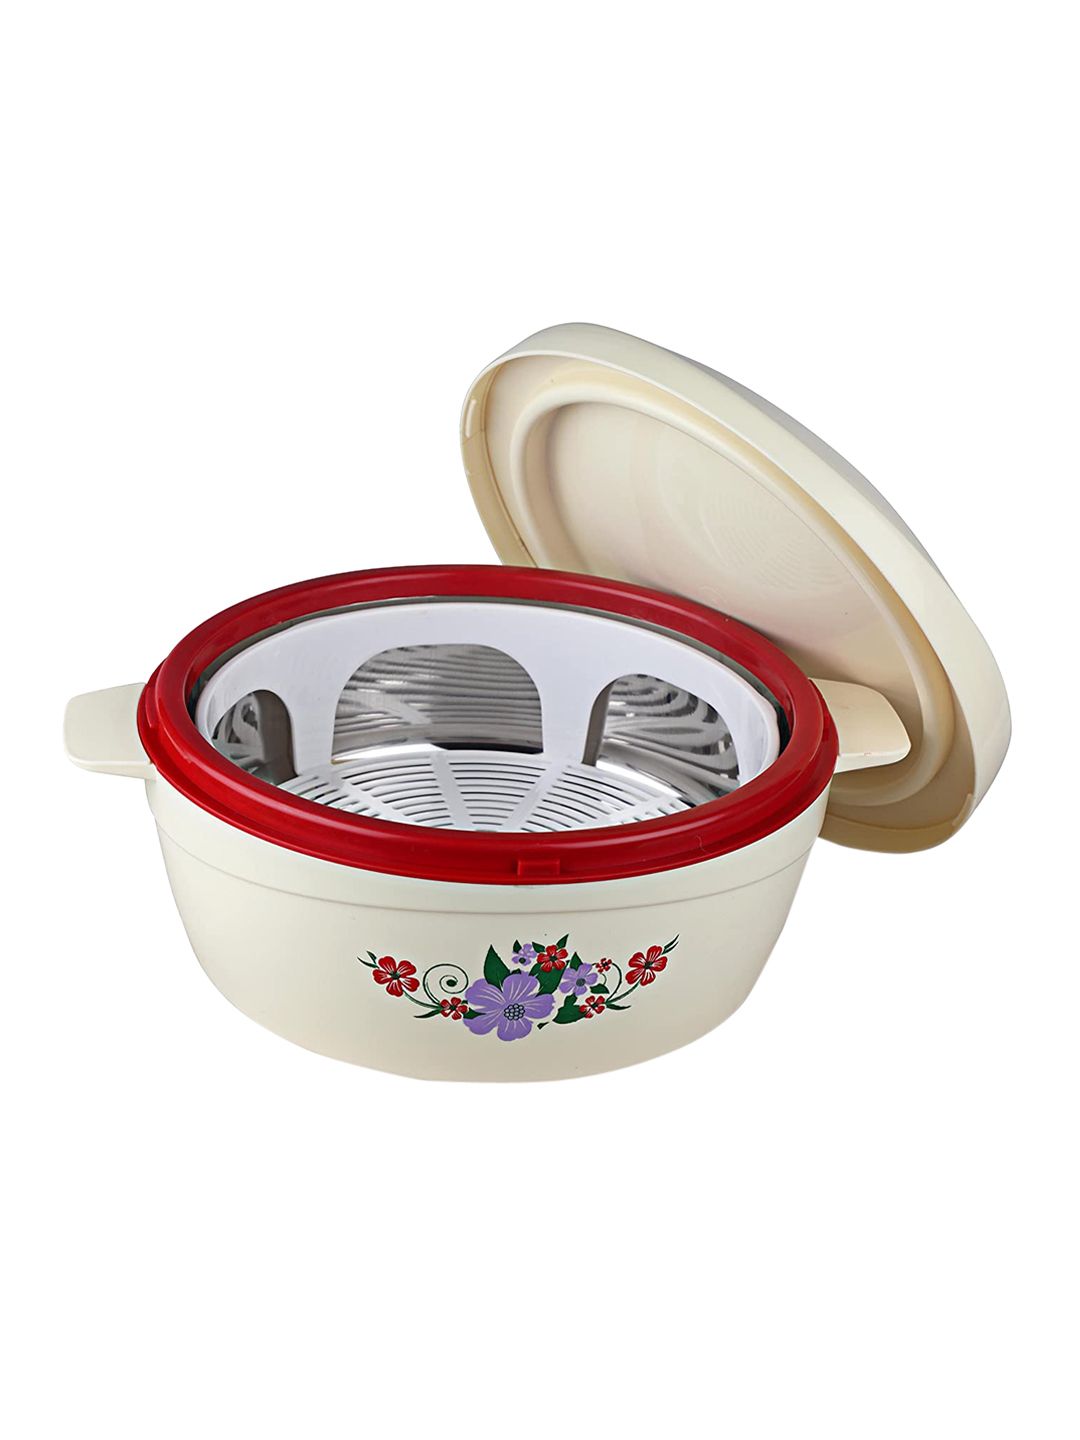 Cello Red Printed Plastic Casserole with Lid 2.5 L Price in India